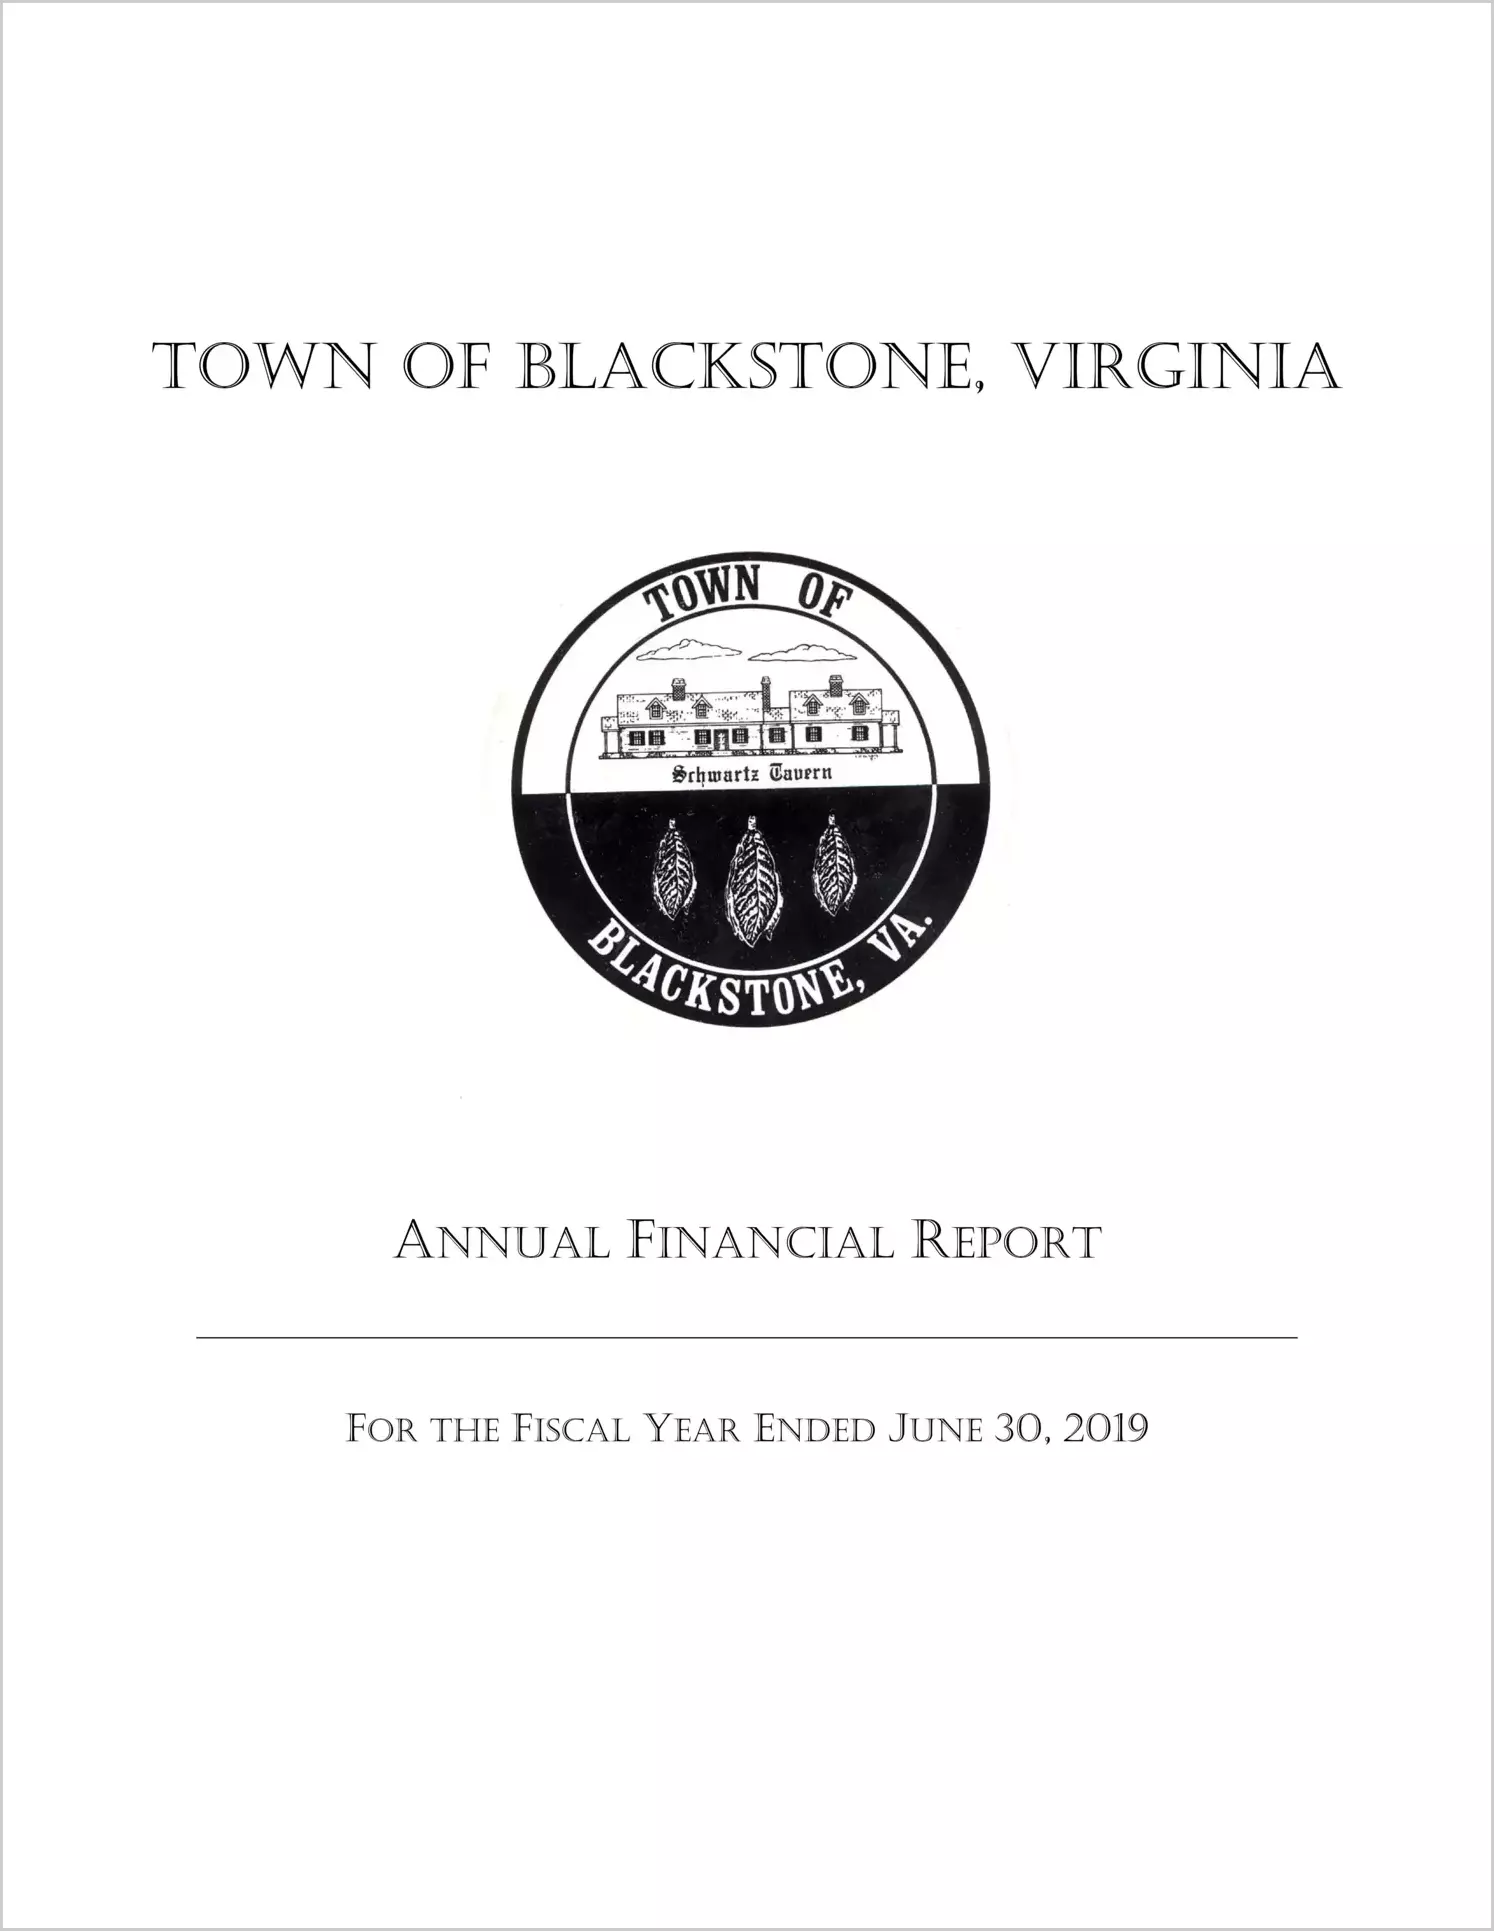 2019 Annual Financial Report for Town of Blackstone